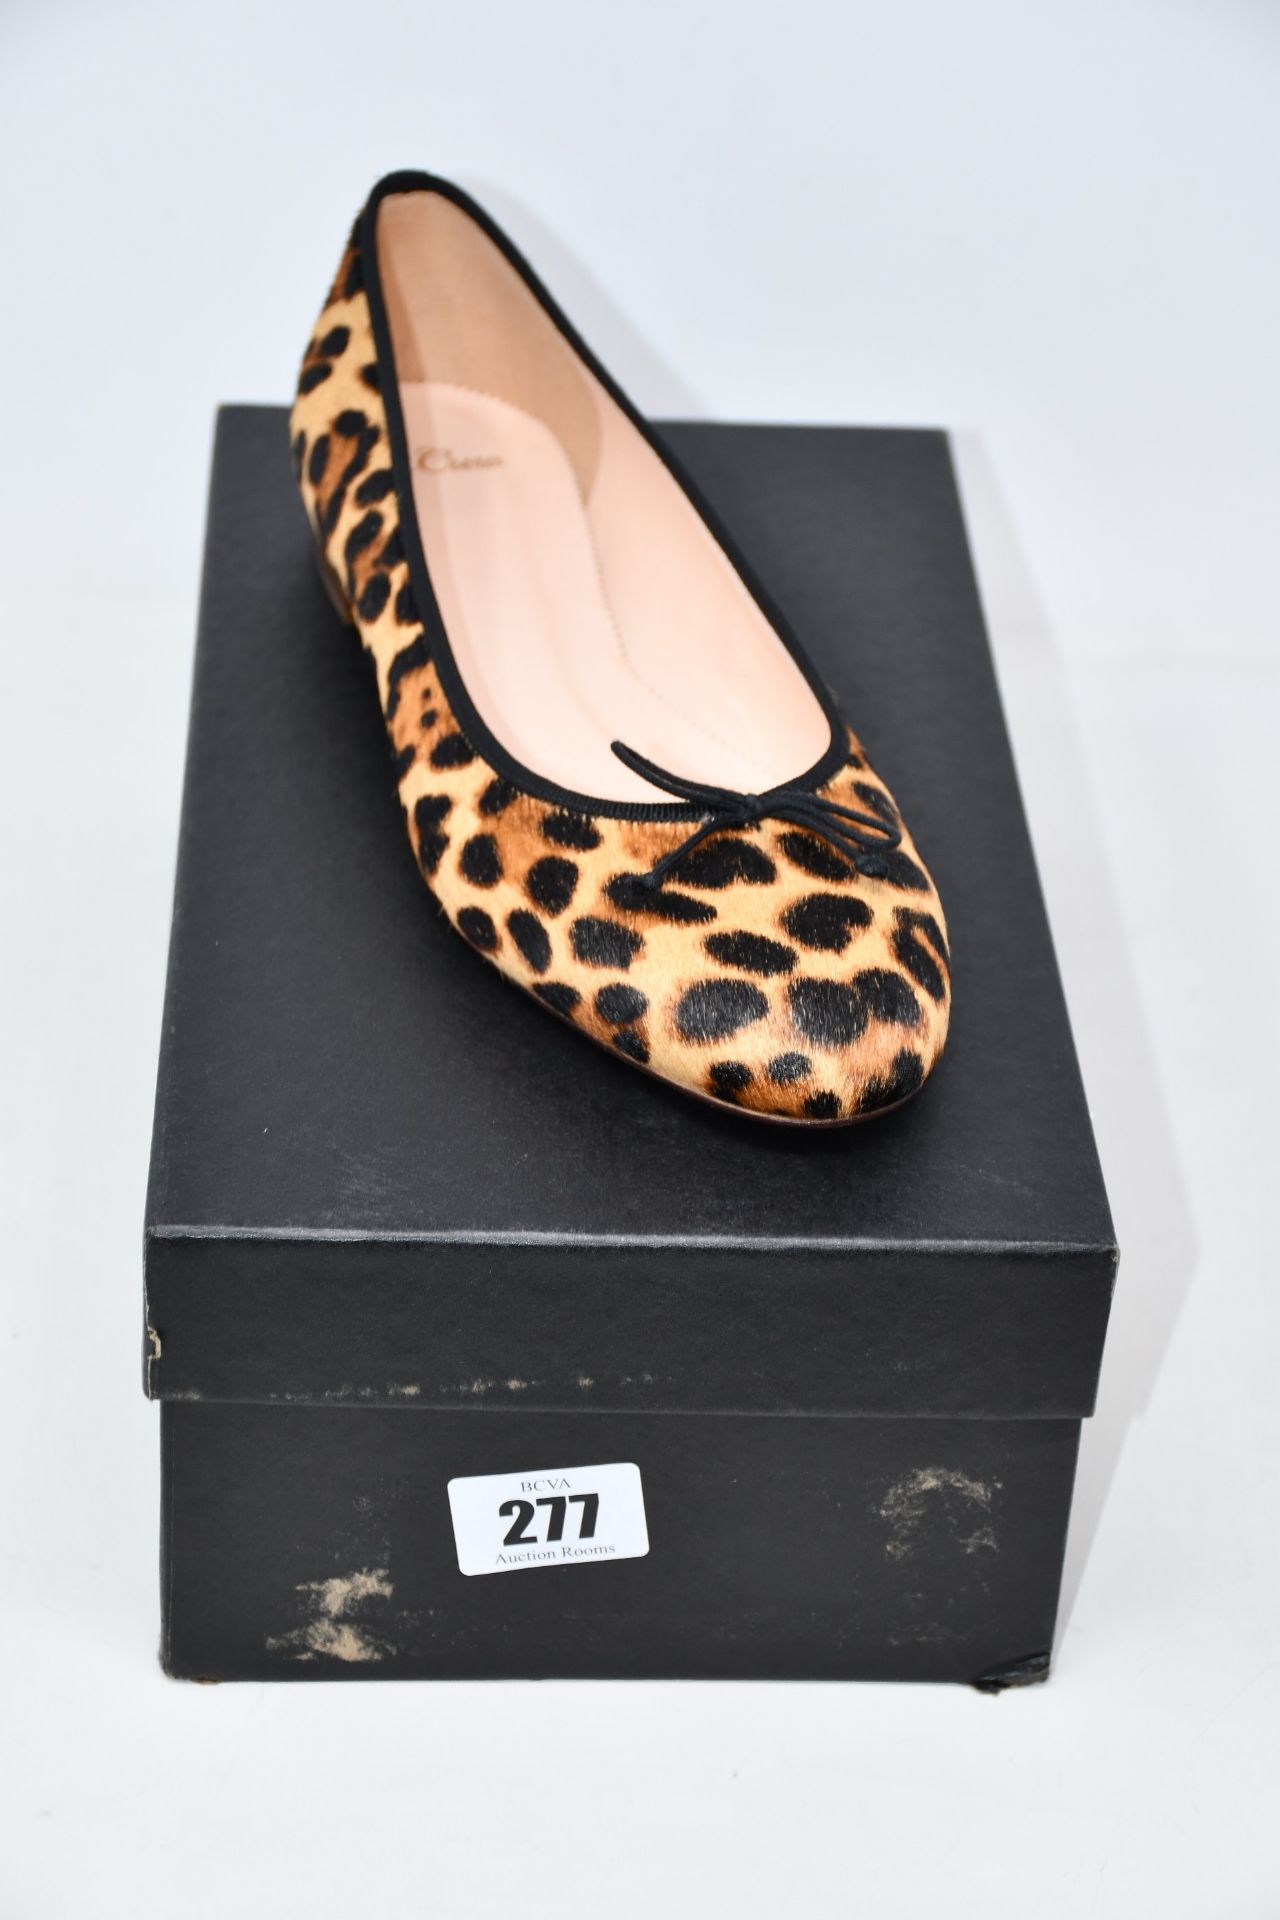 A pair of as new J.Crew ballet flats in leopard (UK 8.5).